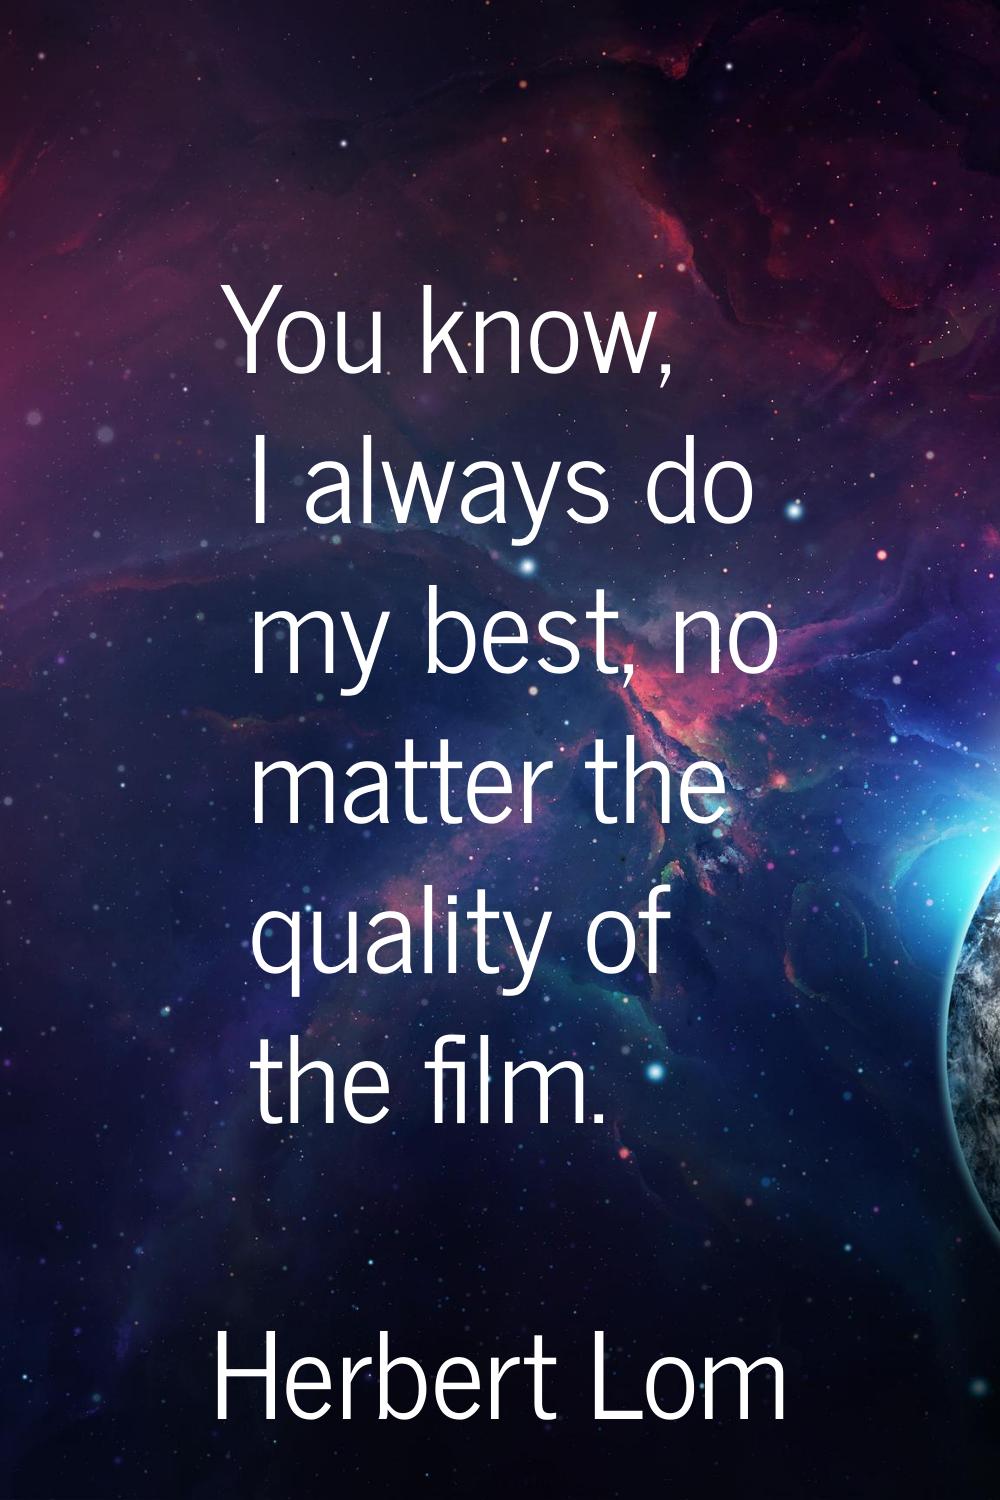 You know, I always do my best, no matter the quality of the film.